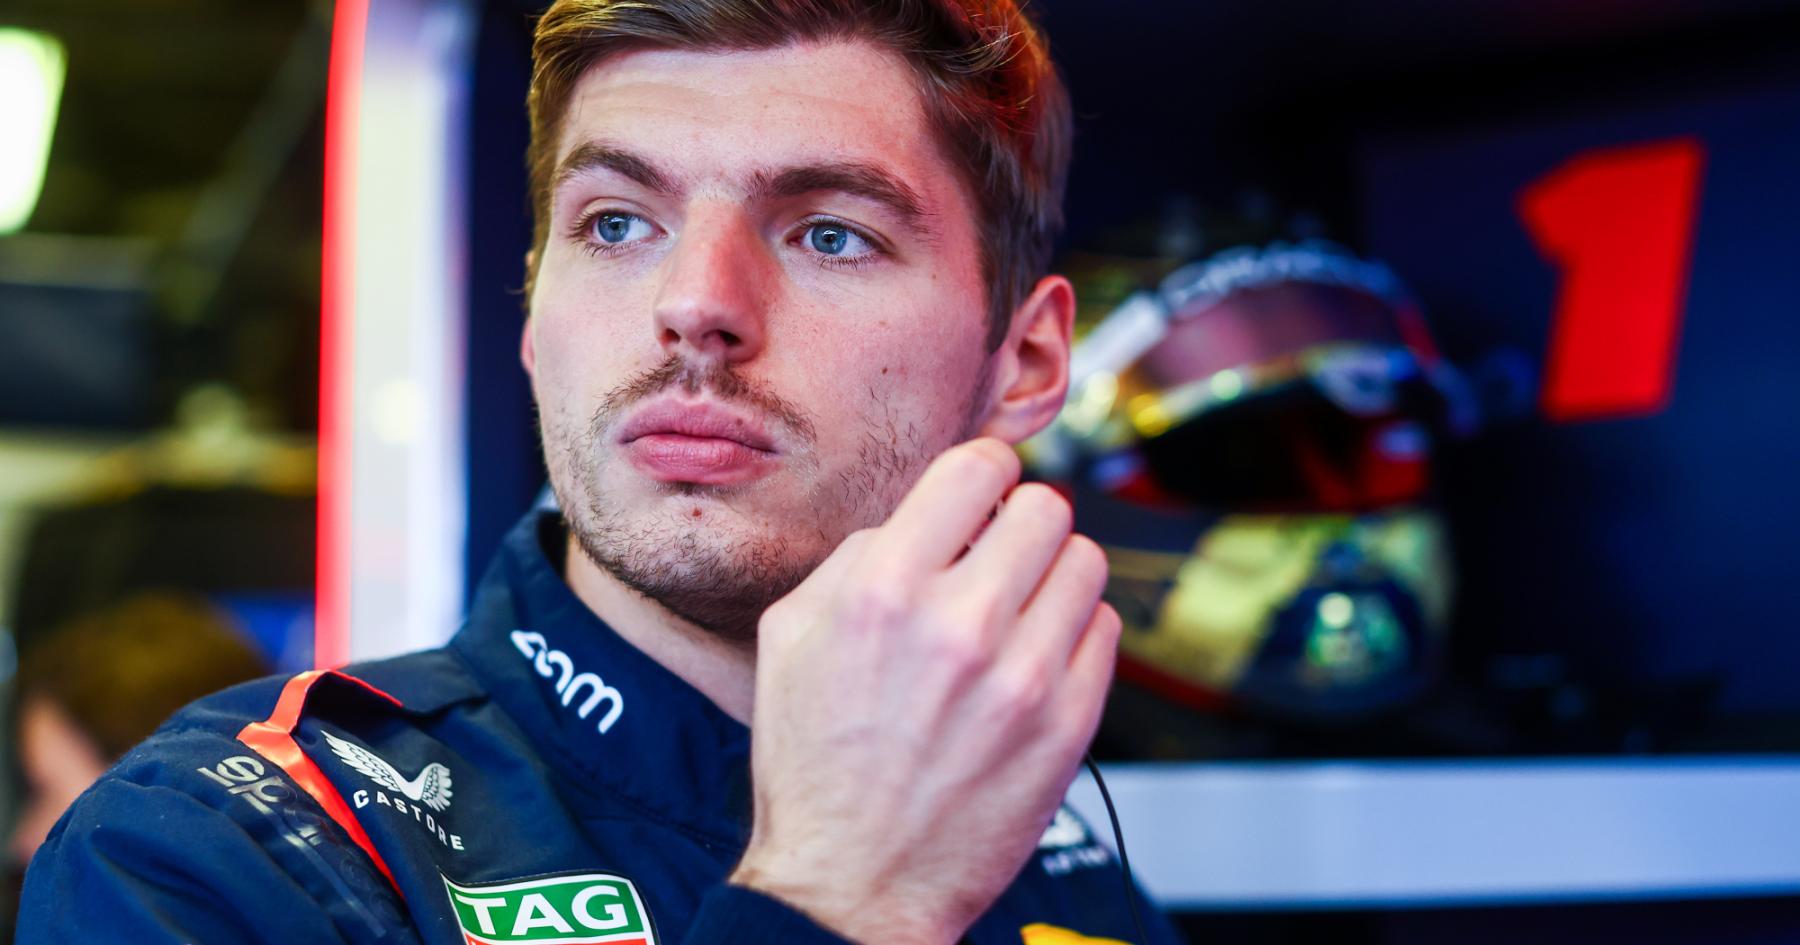 How does Verstappen compare to Hamilton and Schumacher at 26?